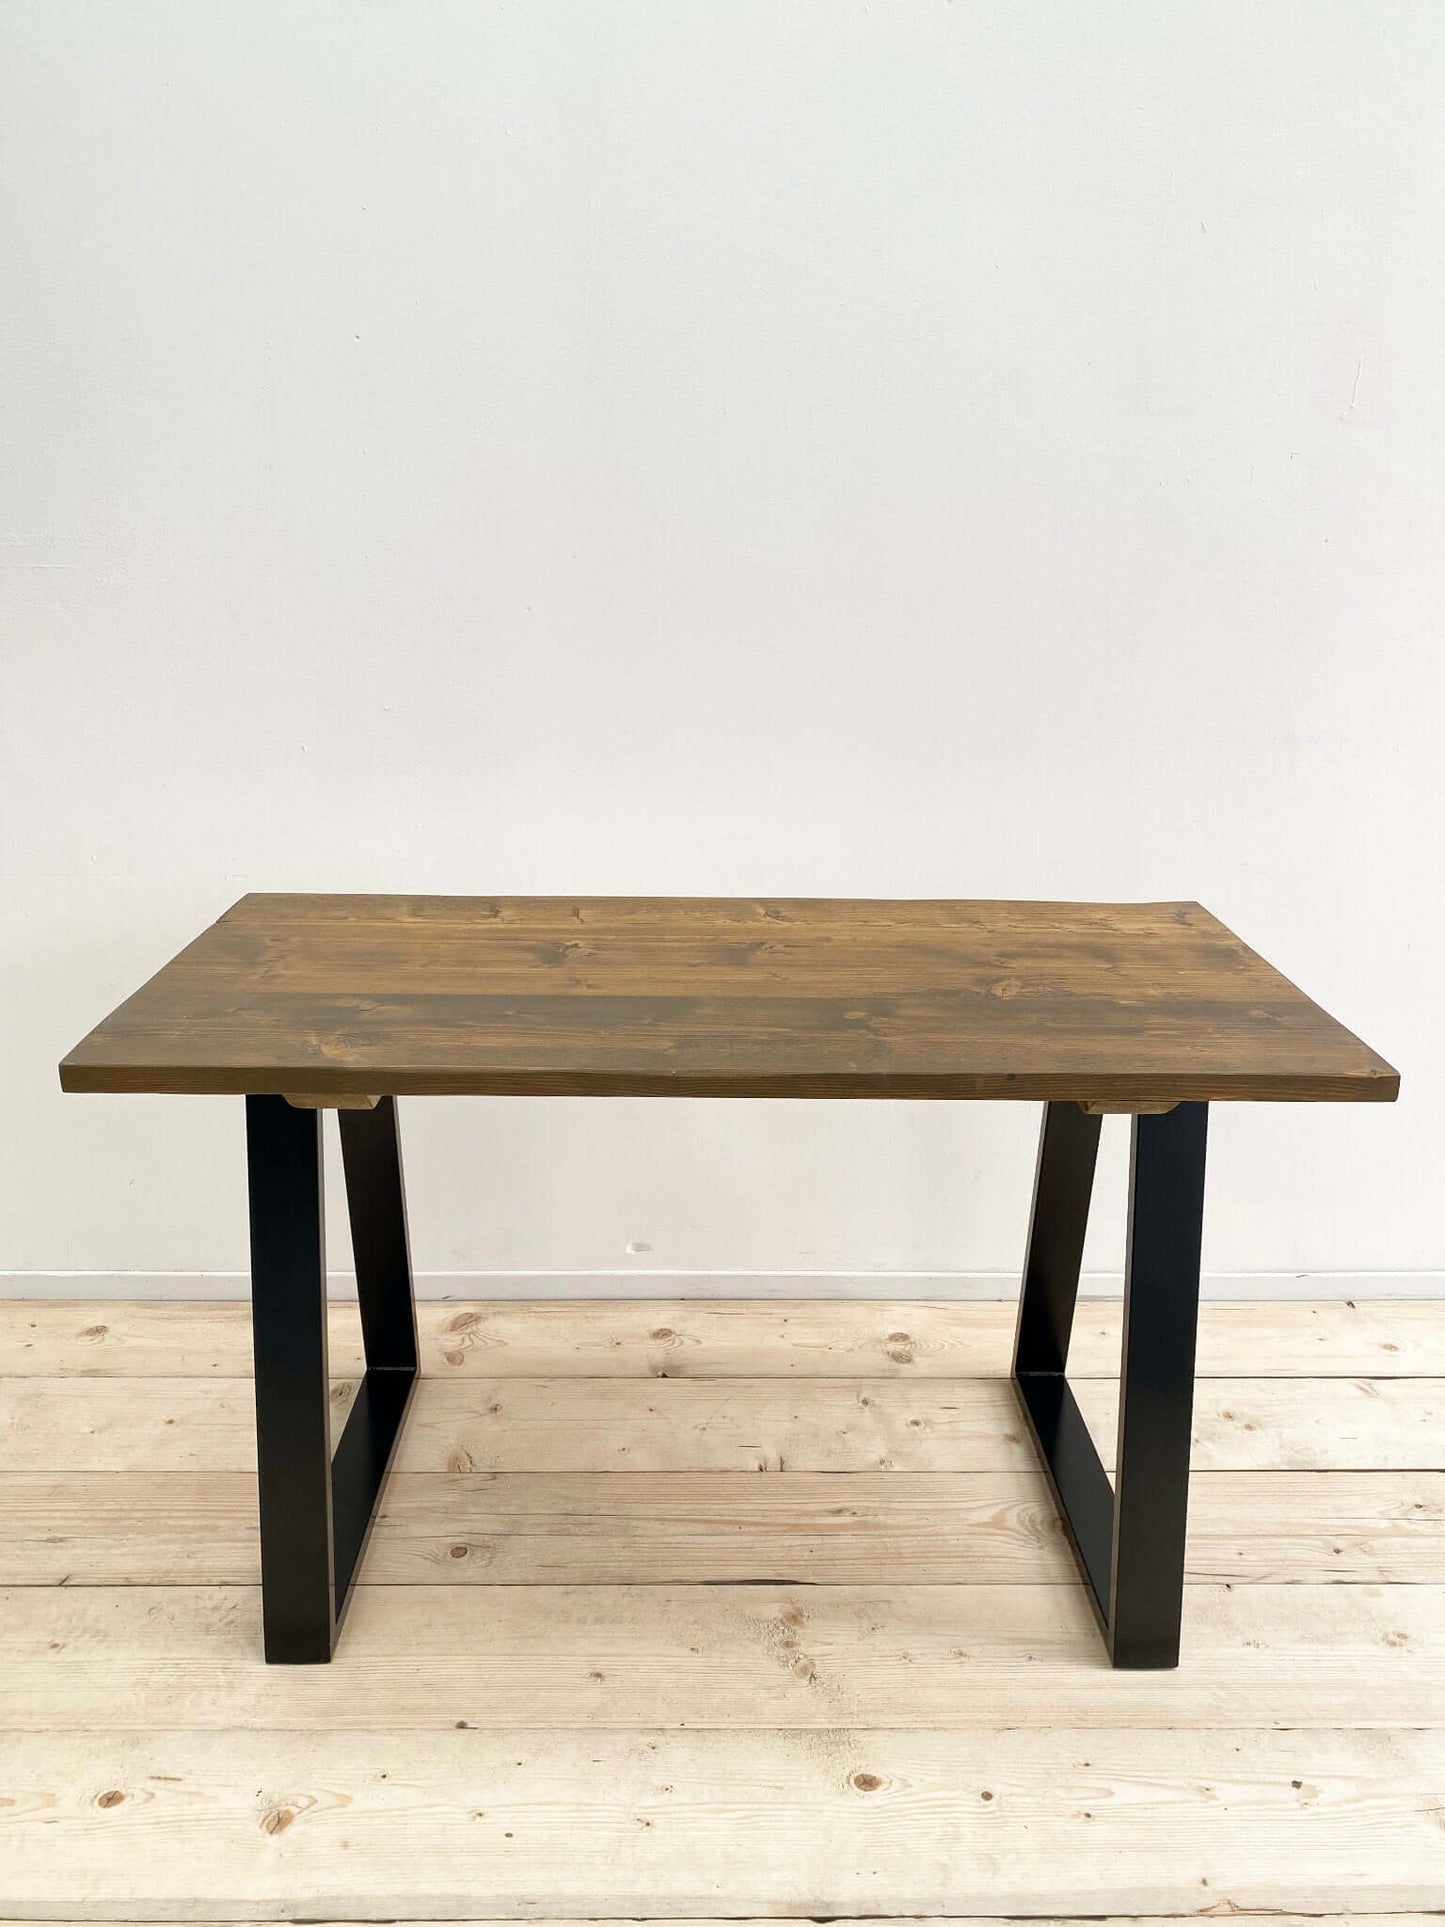 Reclaimed wood outdoor table with industrial legs.